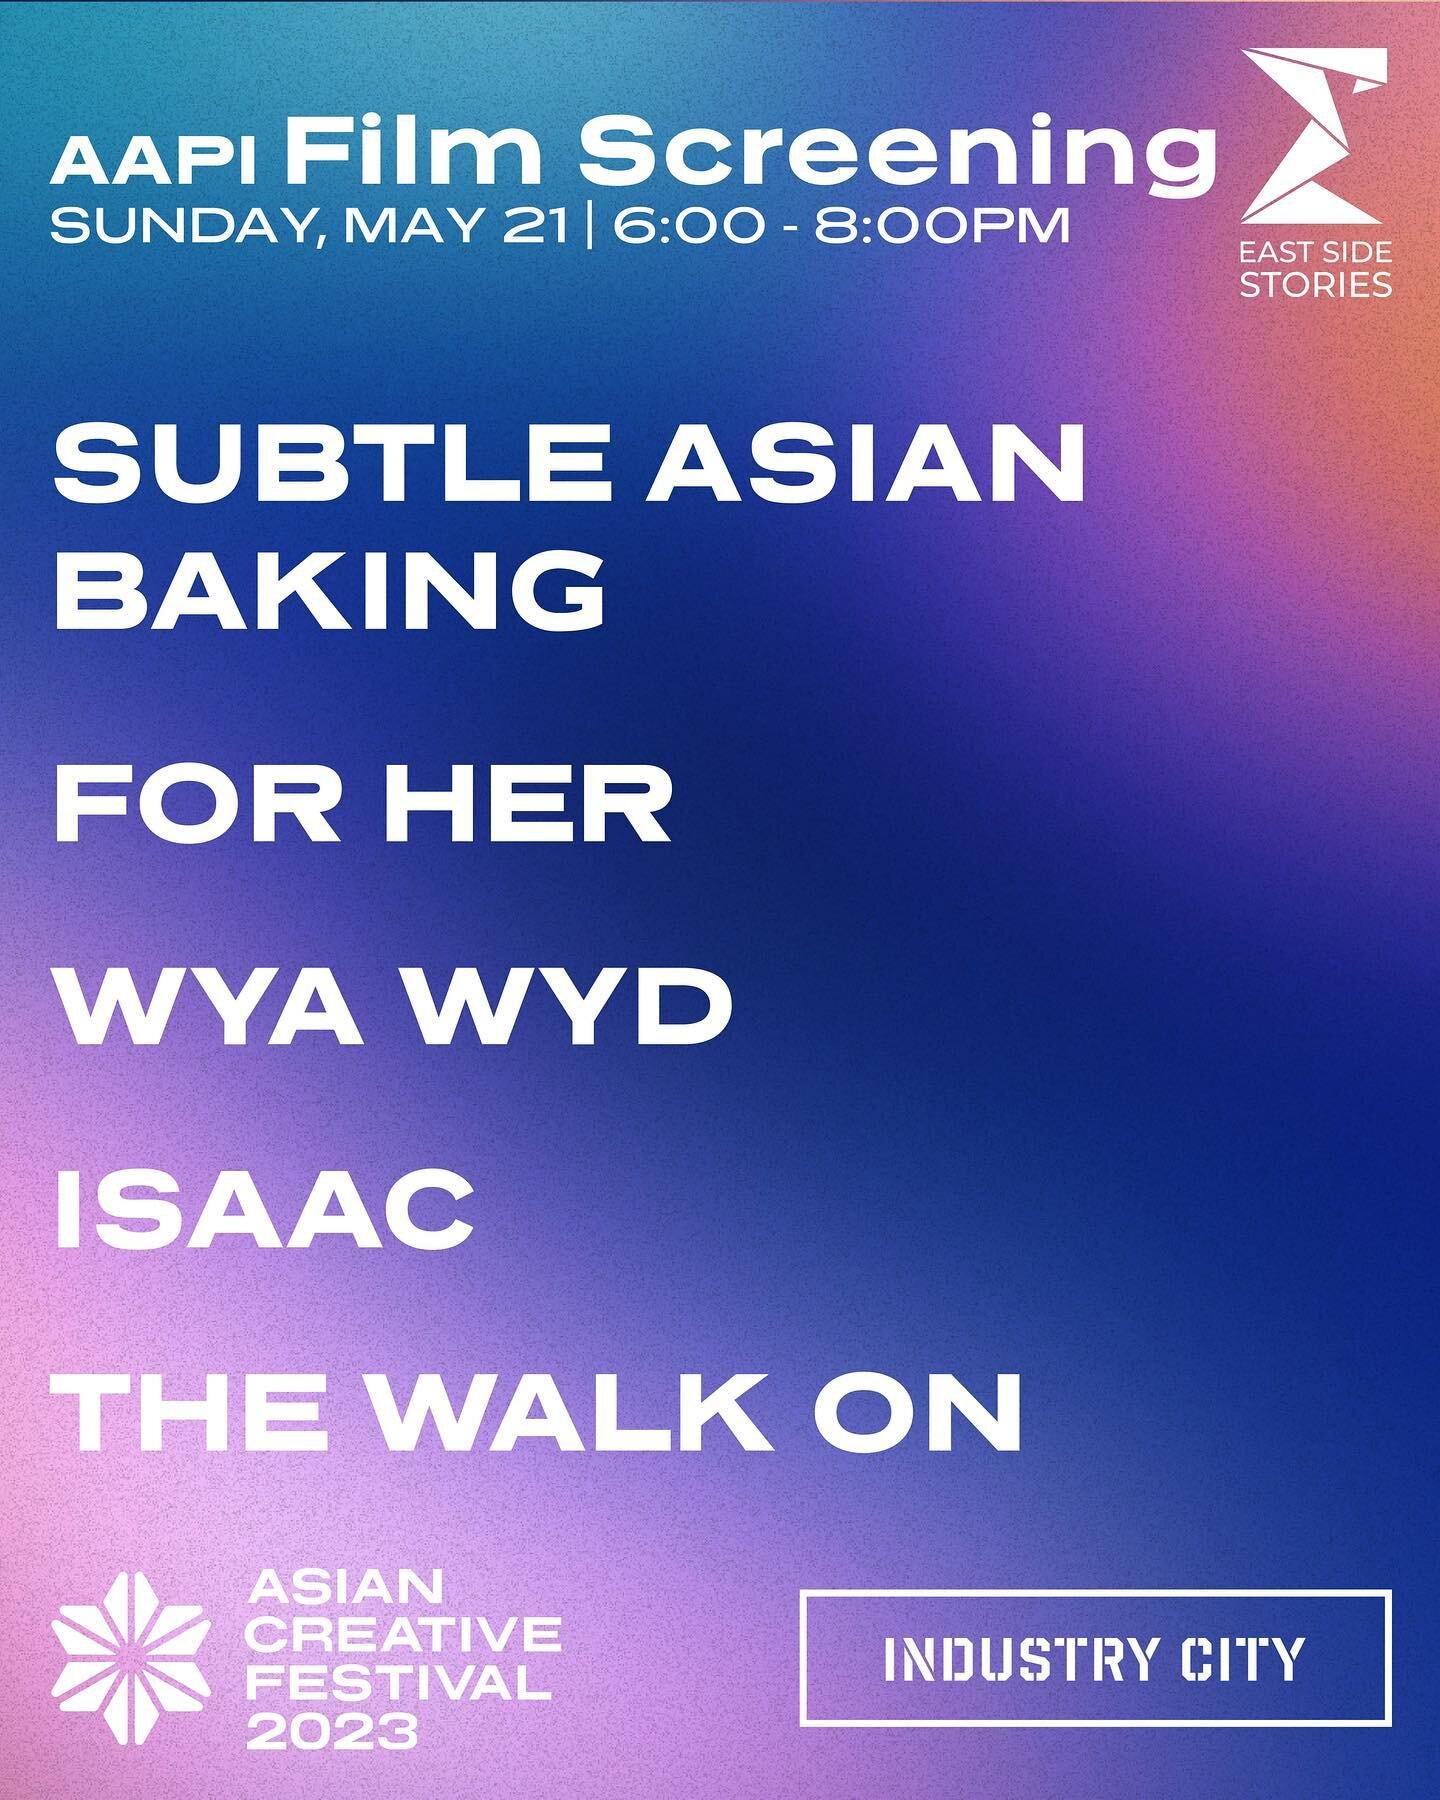 🎥 Save the date for an exciting film screening session hosted by East Side Stories on May 21 (Sun)! We have an amazing lineup of films and videos:

✨Subtle Asian Baking (An @eastsidestoriesnyc mini-documentary)
Producer: @chichaaang 
Videographer: @